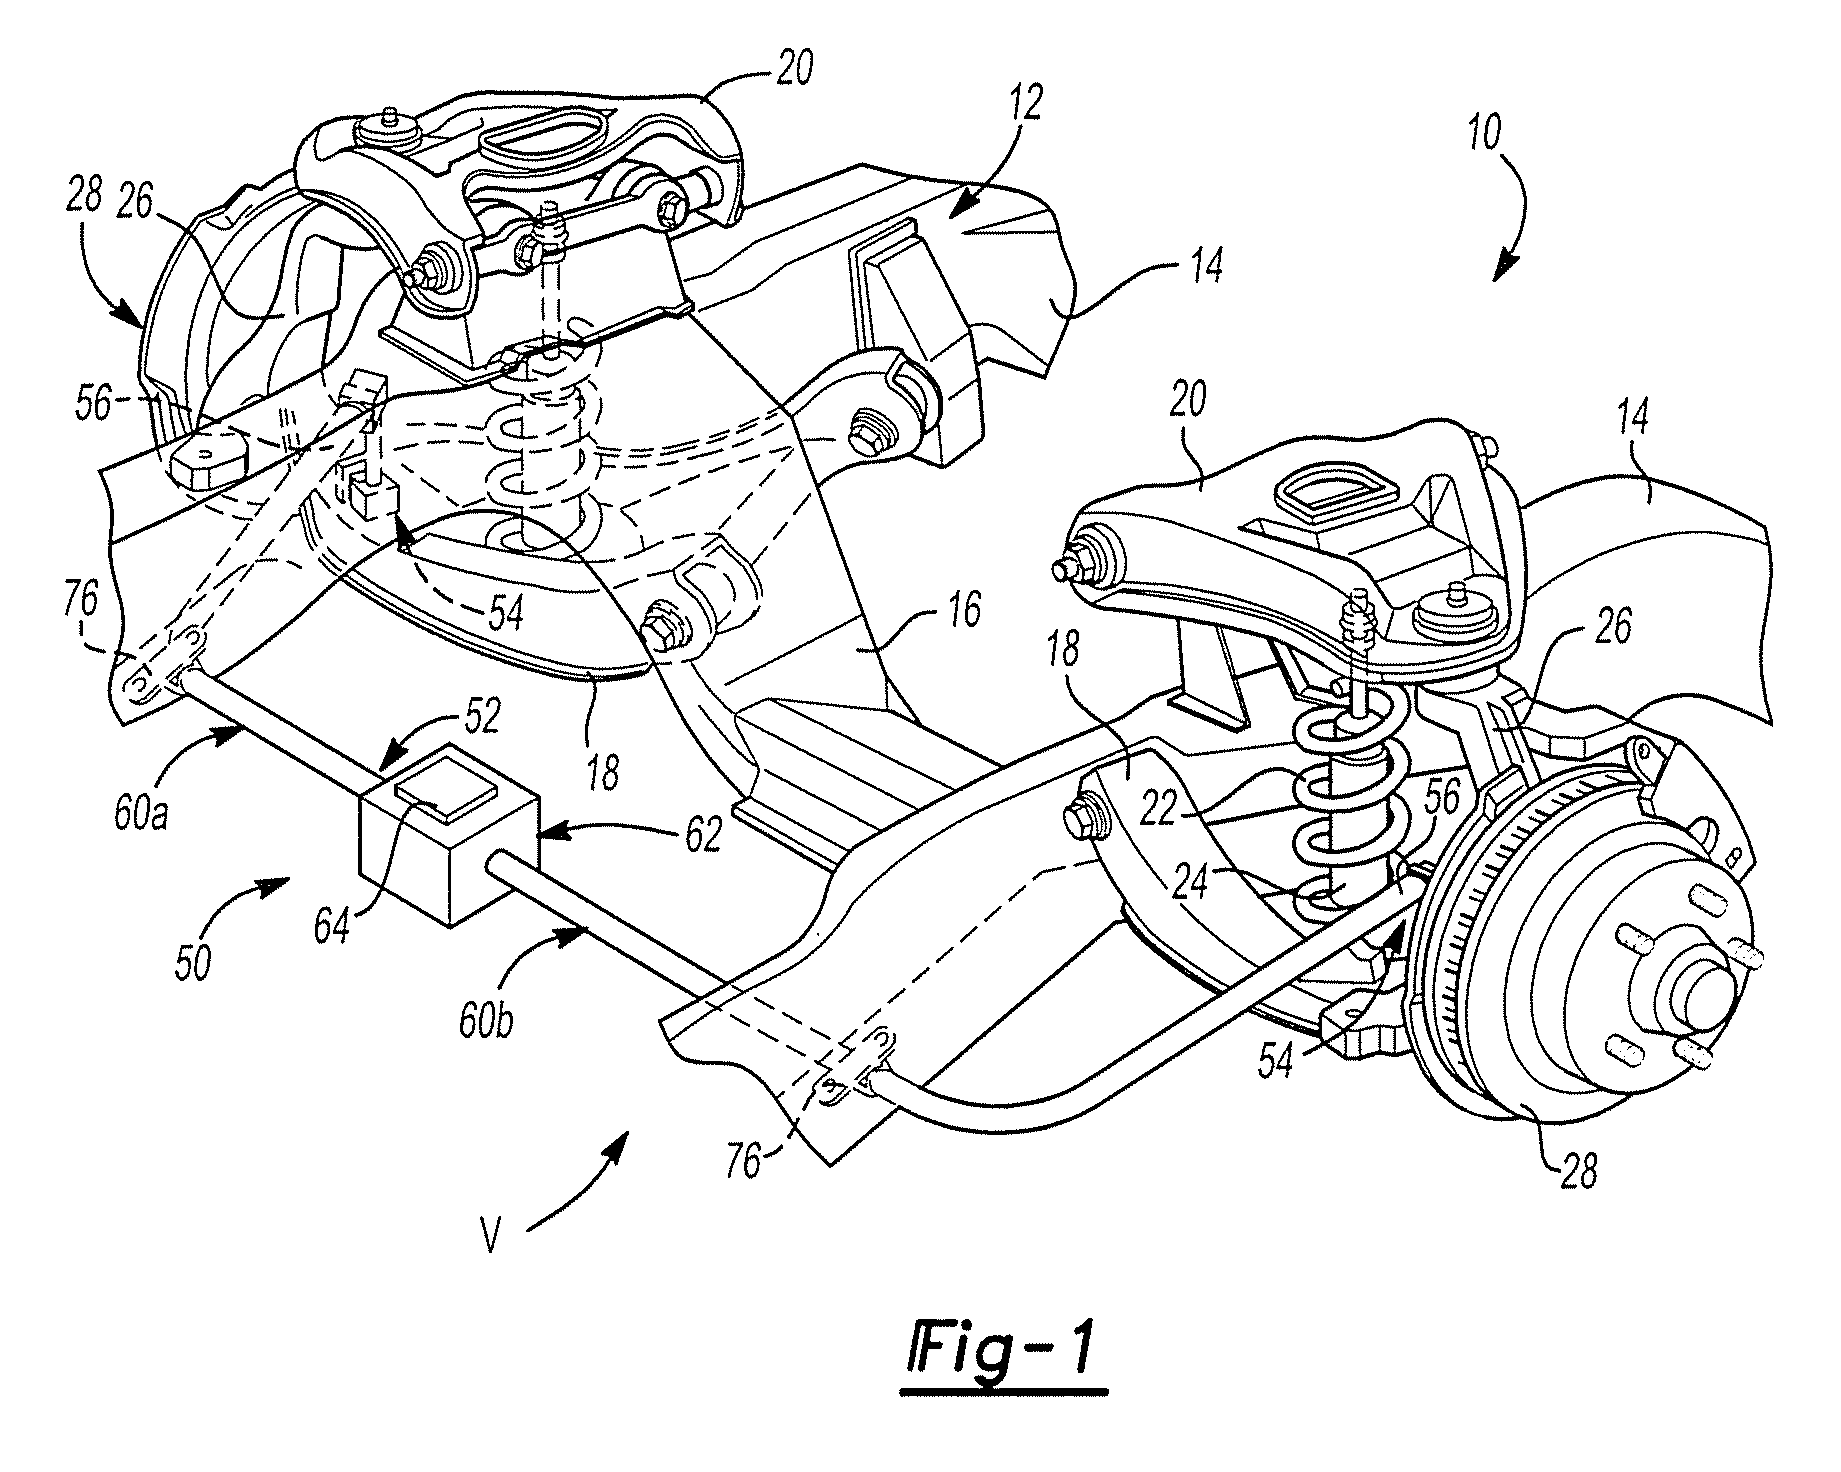 Apparatus and method for coupling a disconnectable stabilizer bar